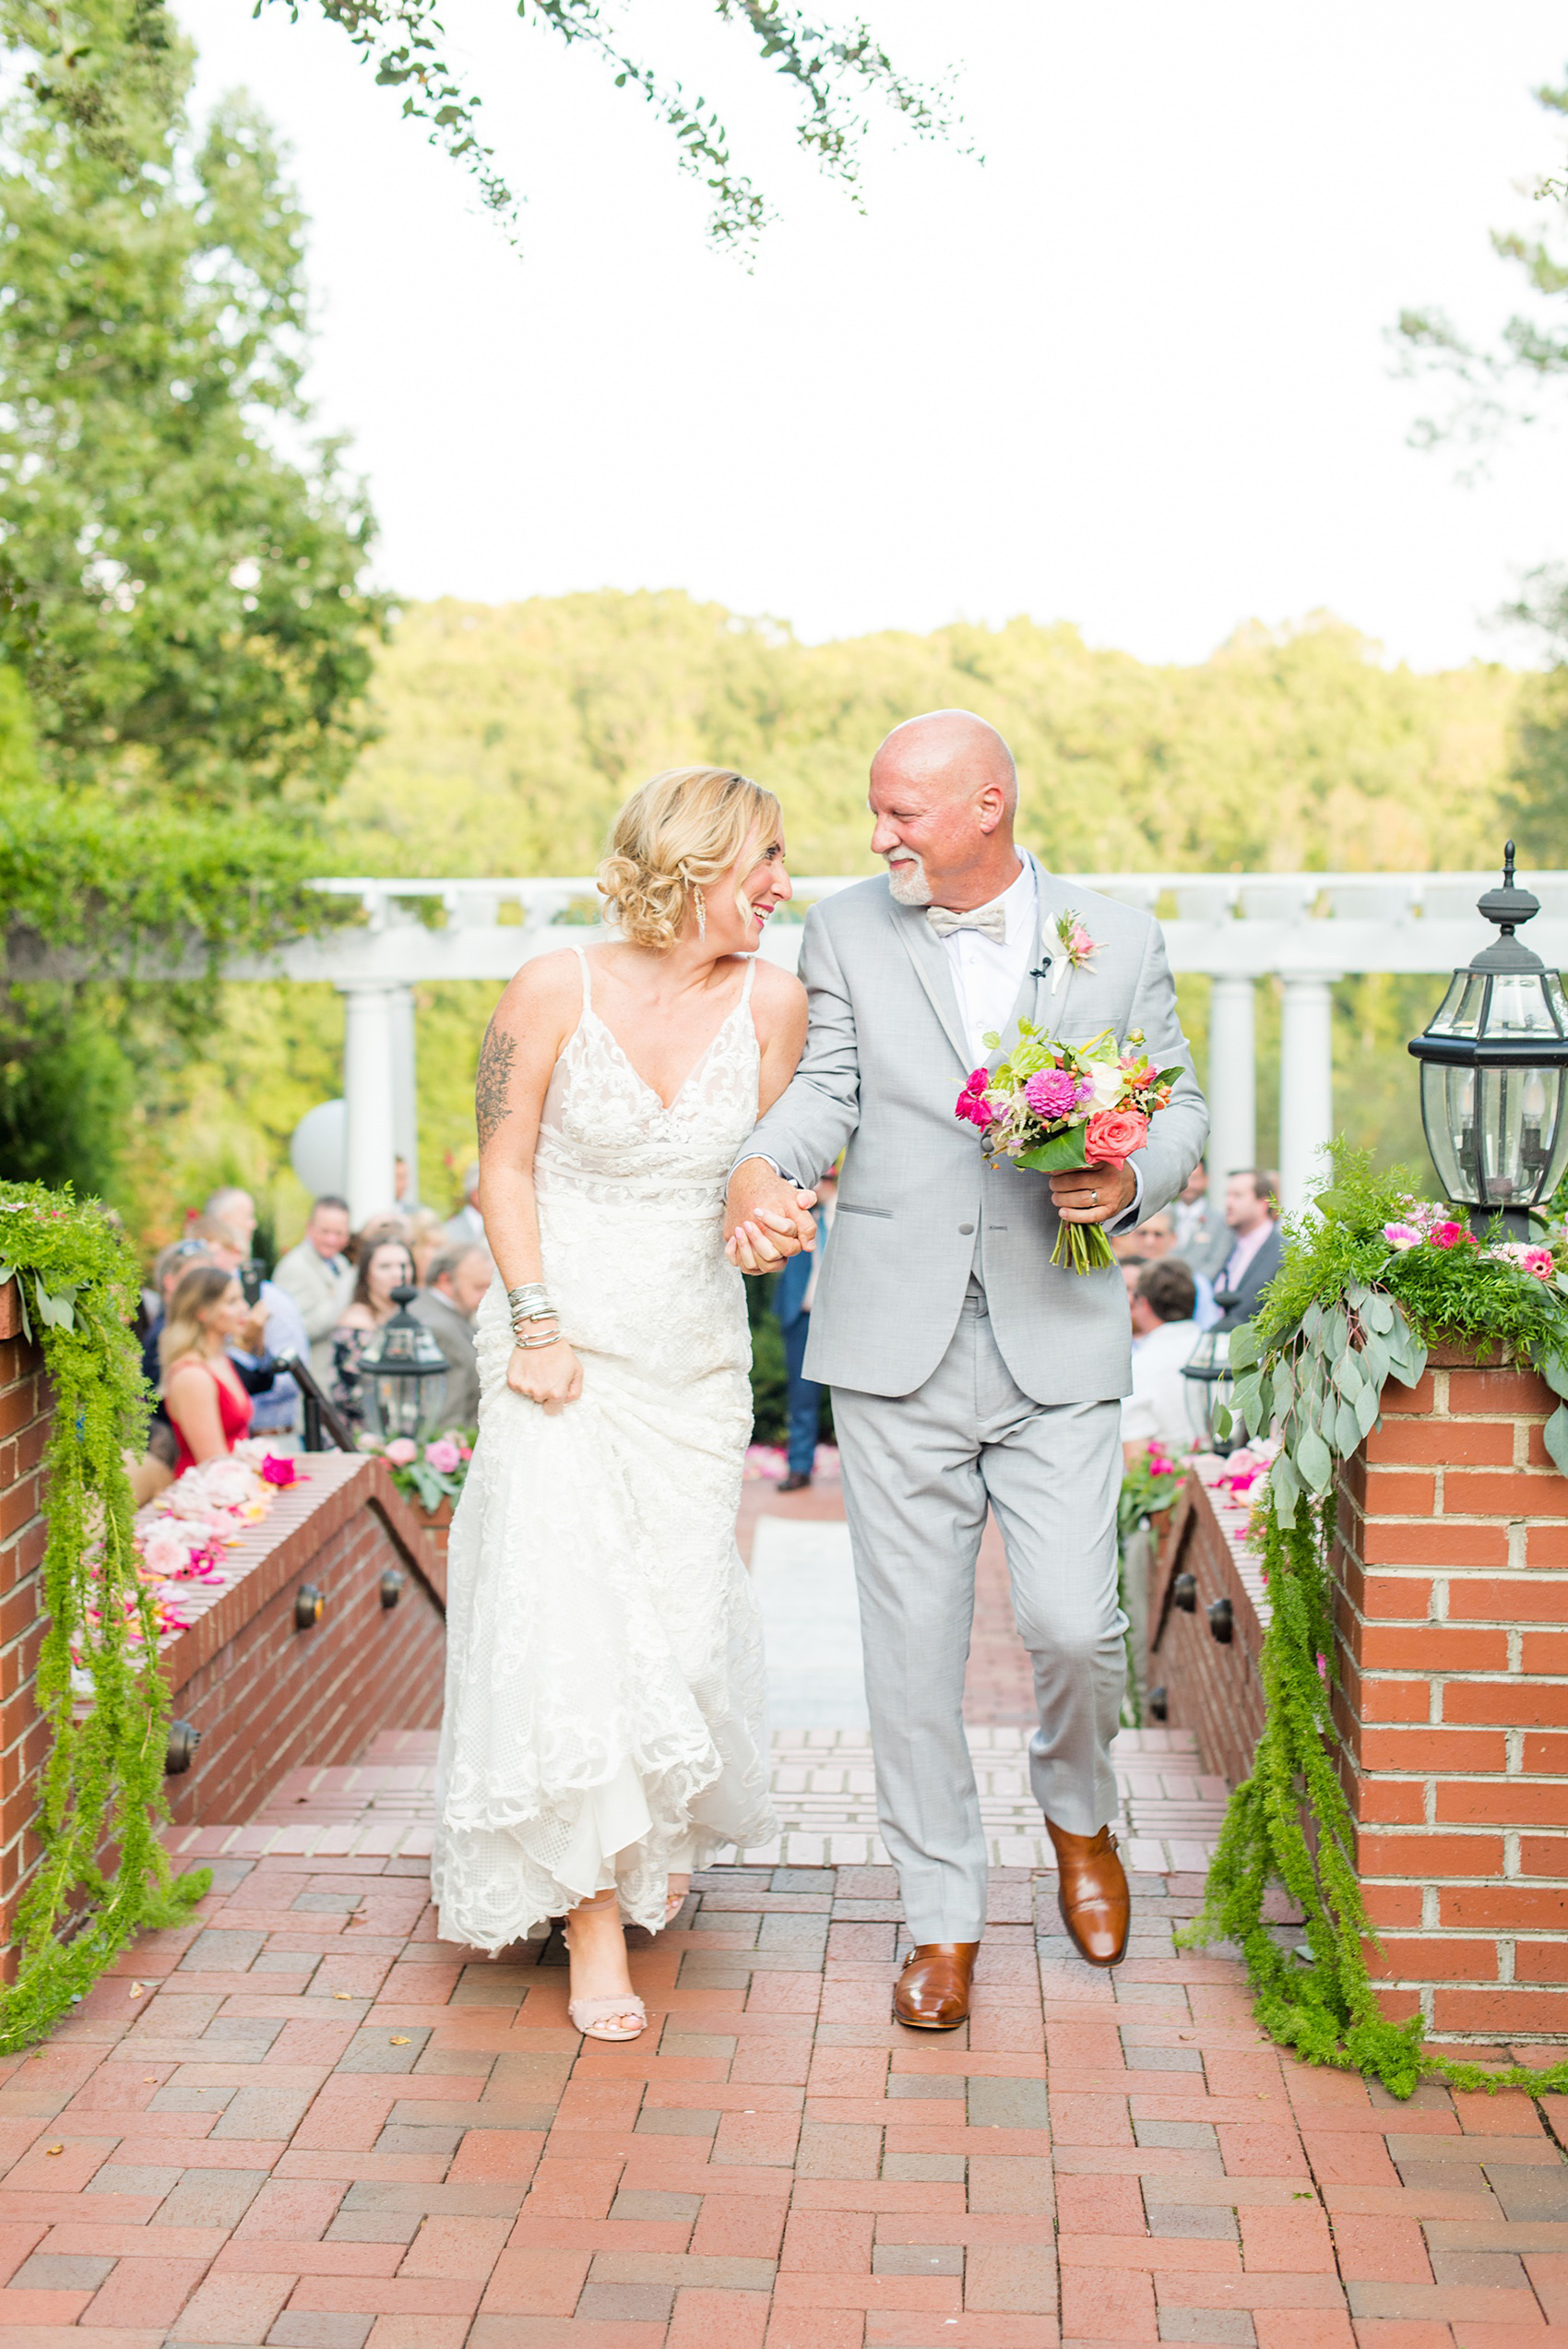 Highgrove Estate wedding photos by Mikkel Paige Photography. It’s a beautiful venue for a wedding large or small, near Raleigh, North Carolina. This wedding had fun signs, custom stationery and table numbers that said places the bride & groom travel to, and romantic candlelight planned by @asouthernsoiree. Click through to see the tropical green leaves, pink and orange flowers dripping from their outdoor ceremony space! #NorthCarolinaVenues #MikkelPaige #ASouthernSoiree #OutdoorCeremony